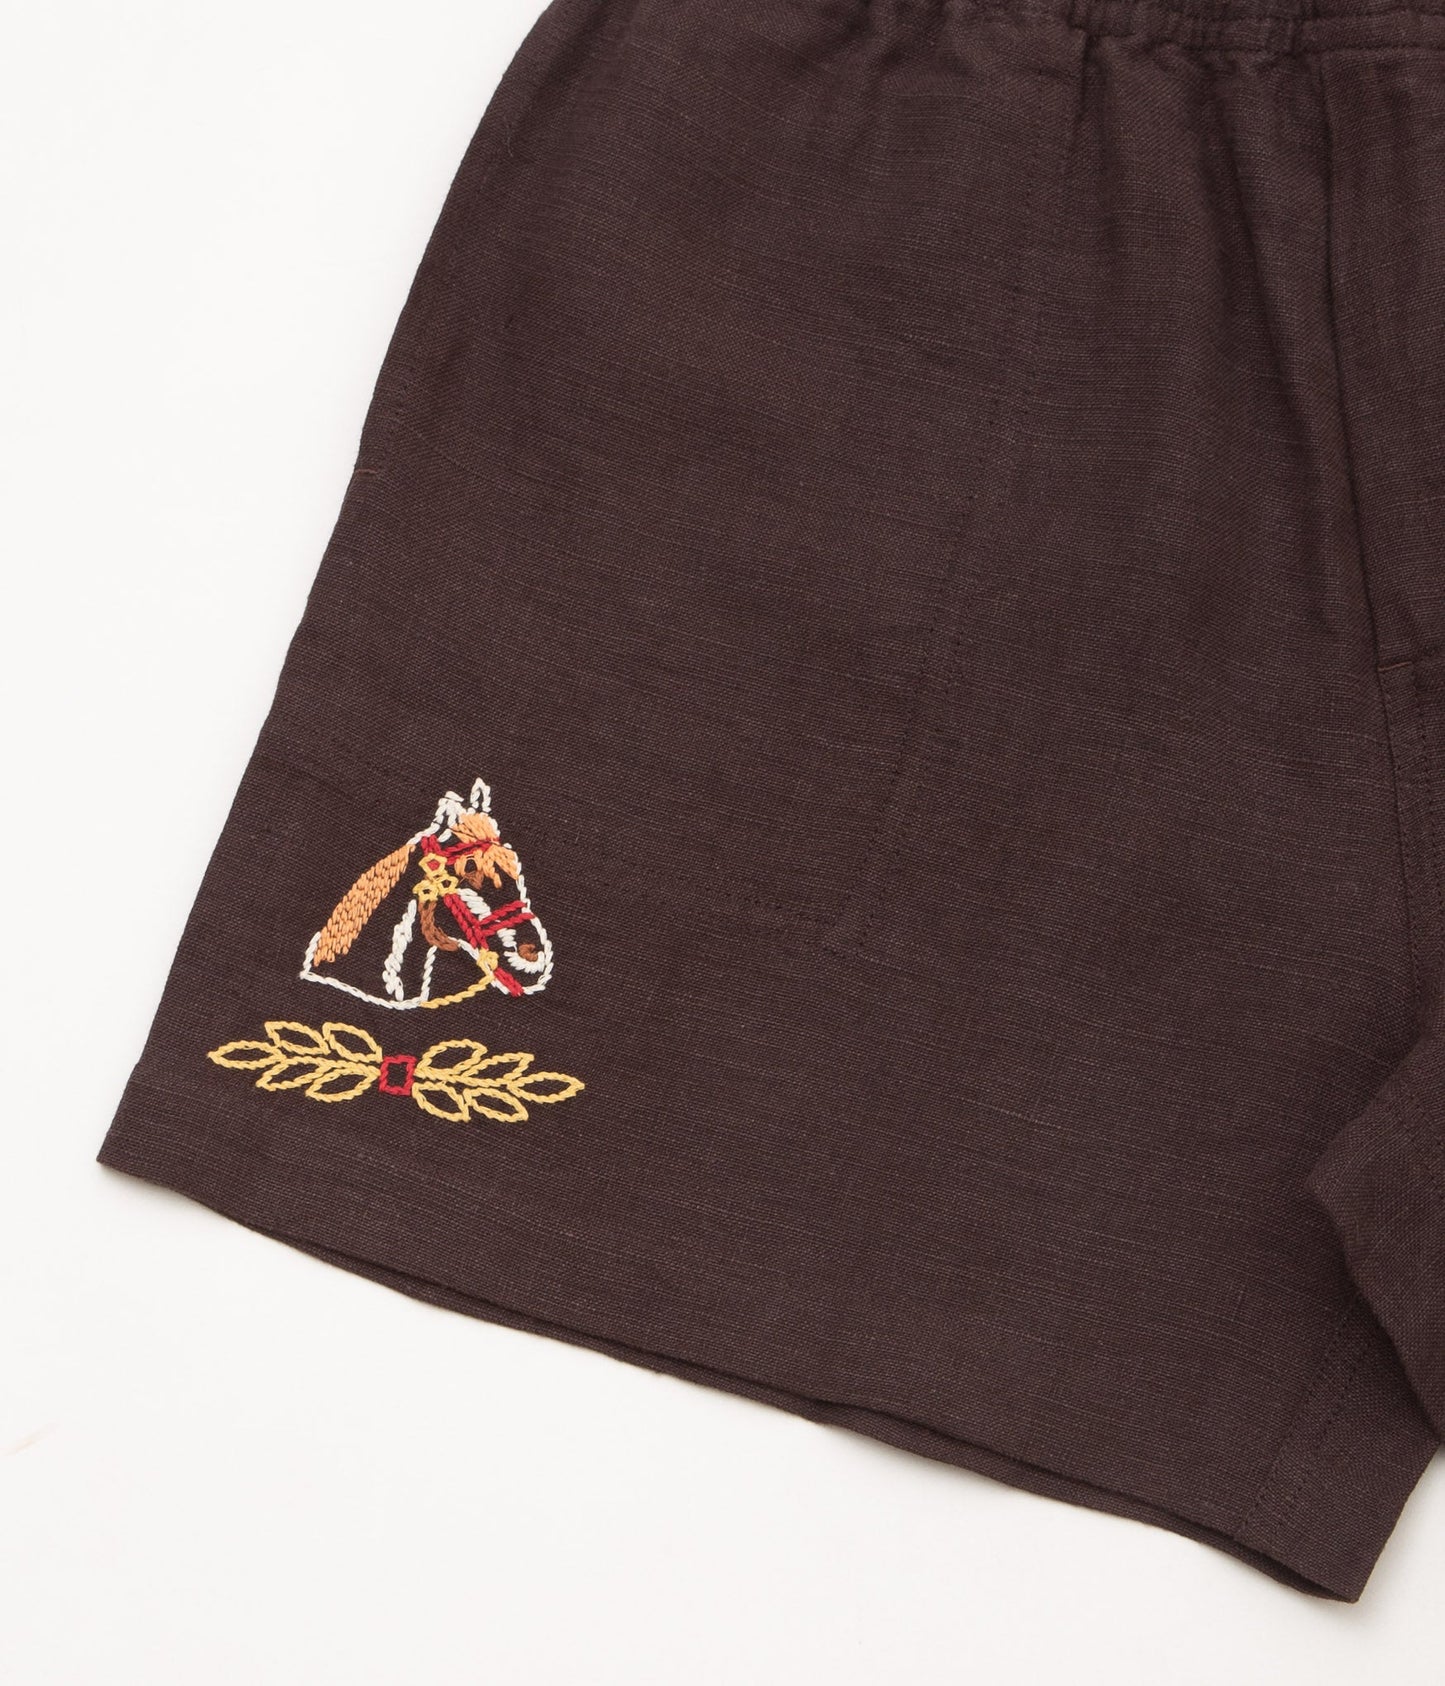 BODE "SHOW PONY SHORTS"(BROWN MULTI)